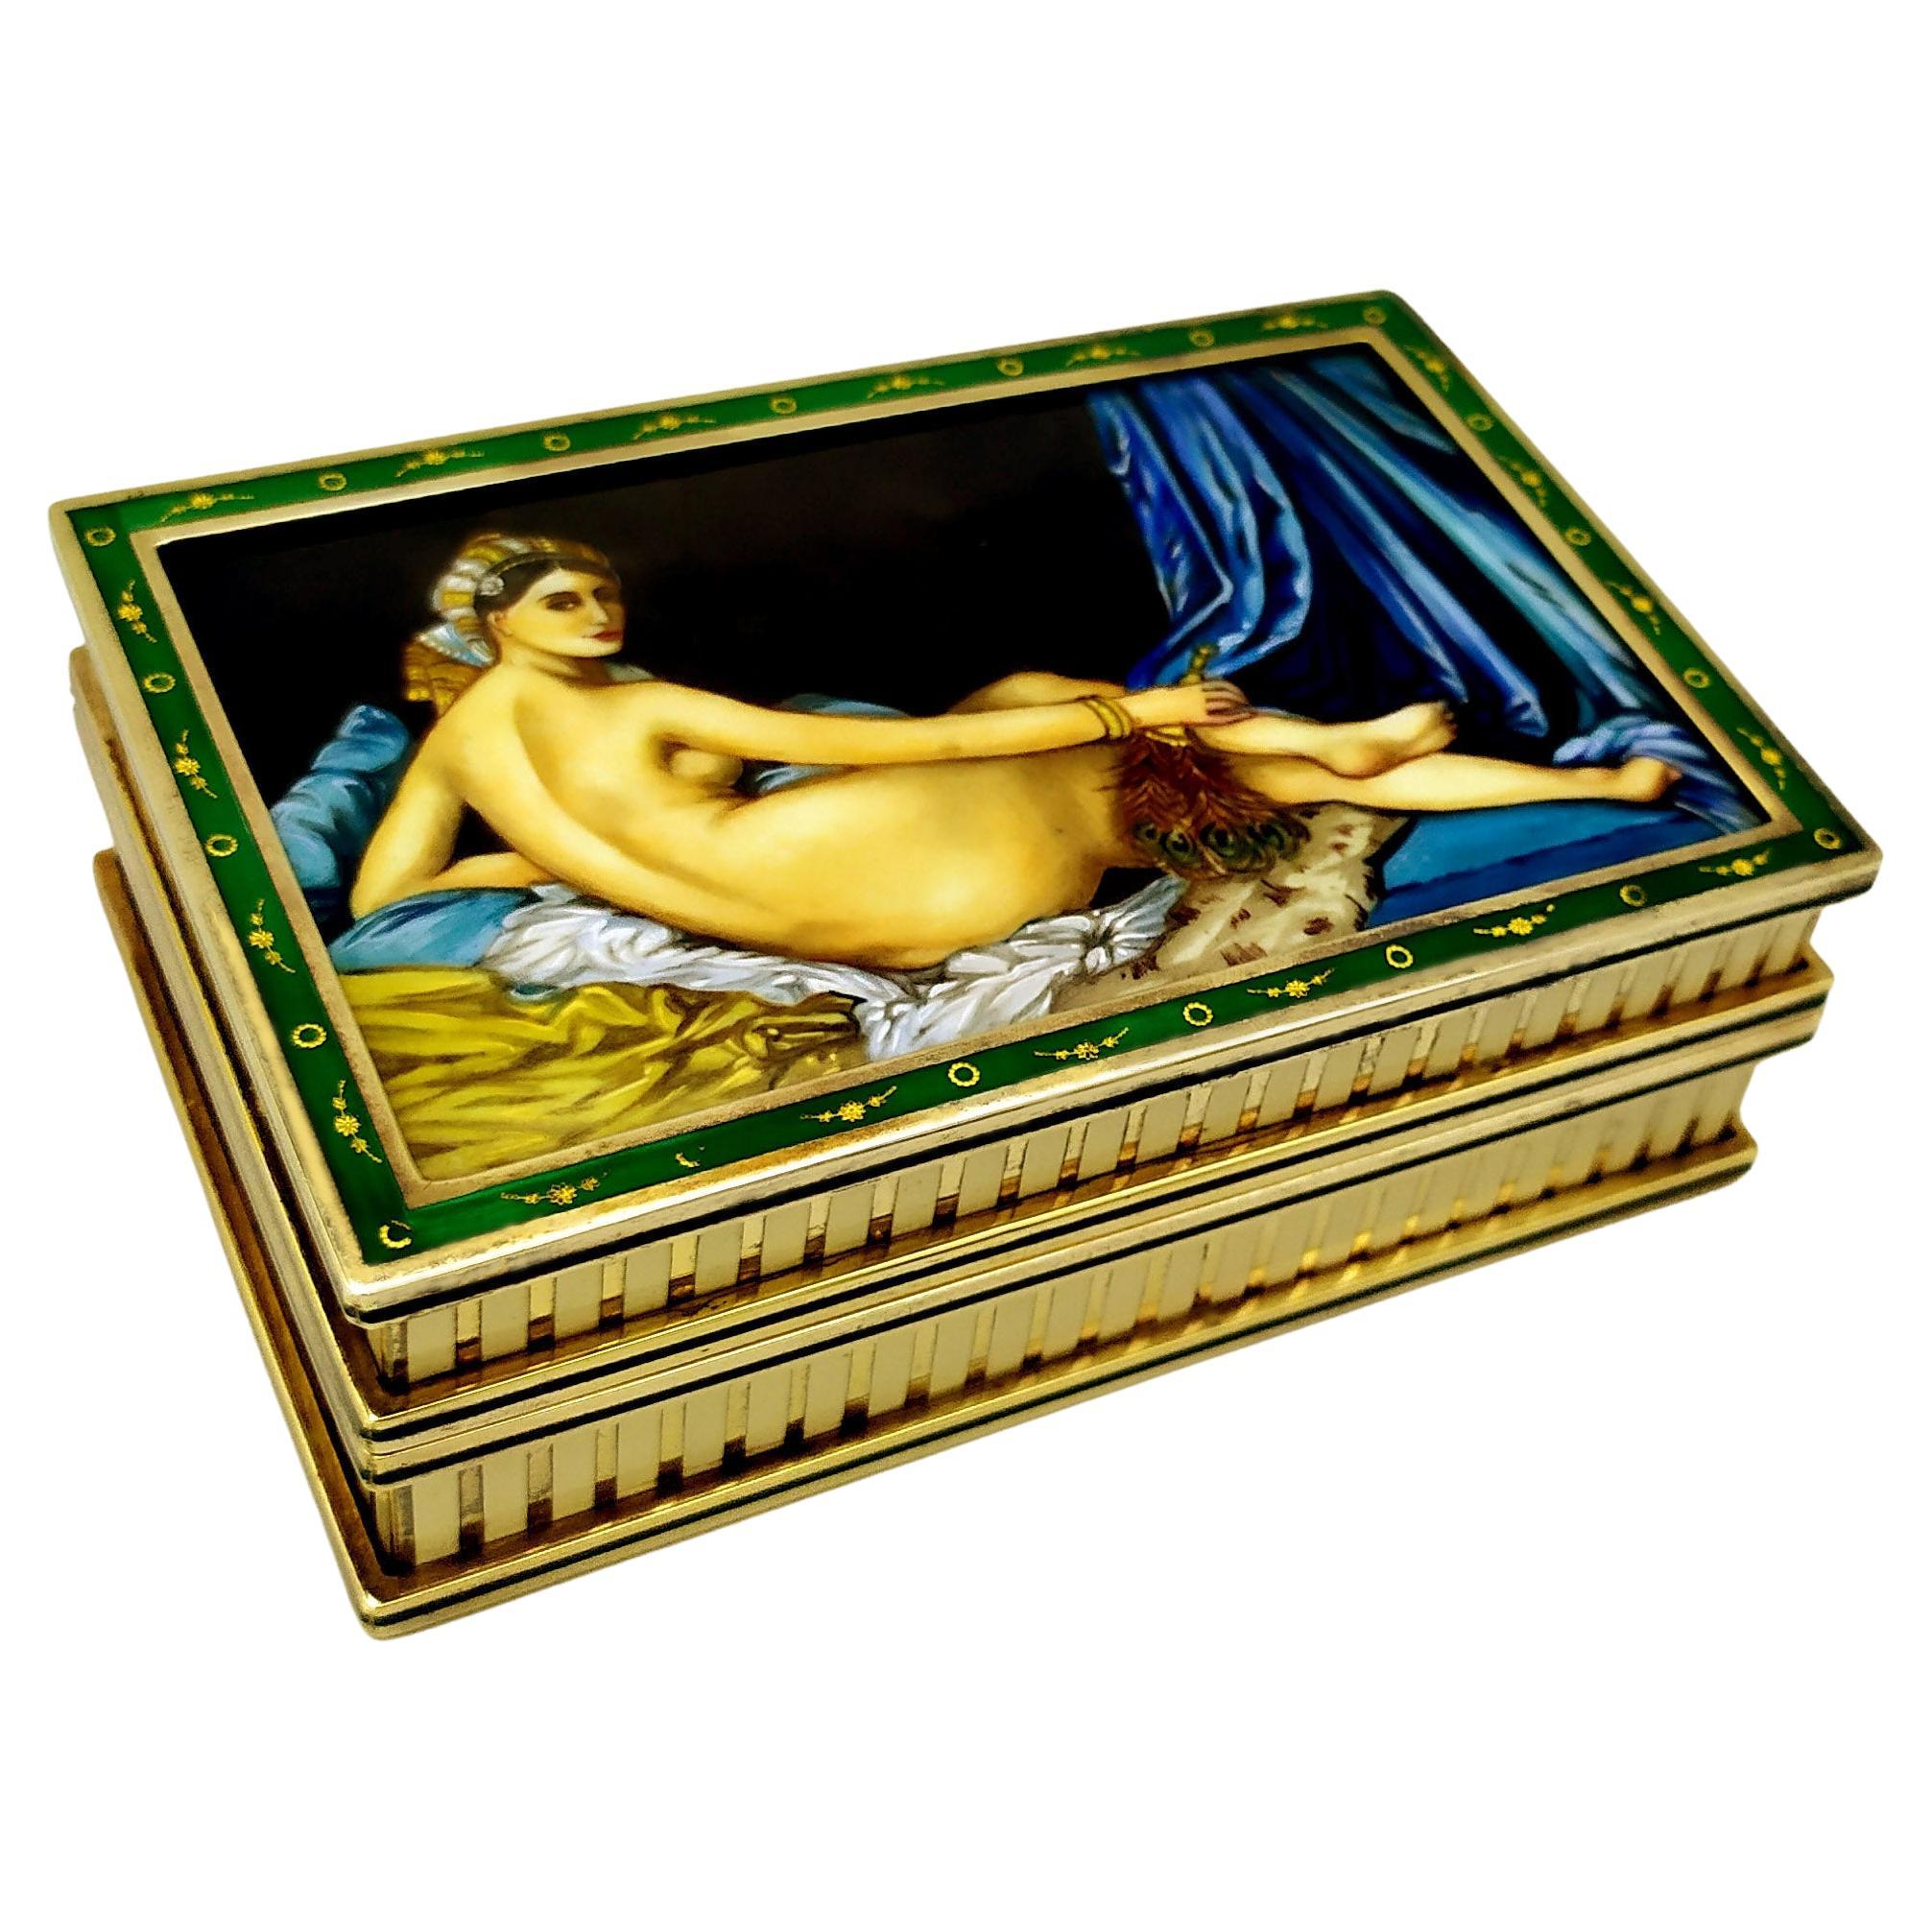 Table Box “The Great Odalisque” Fired Enamel on Guilloche Salimbeni